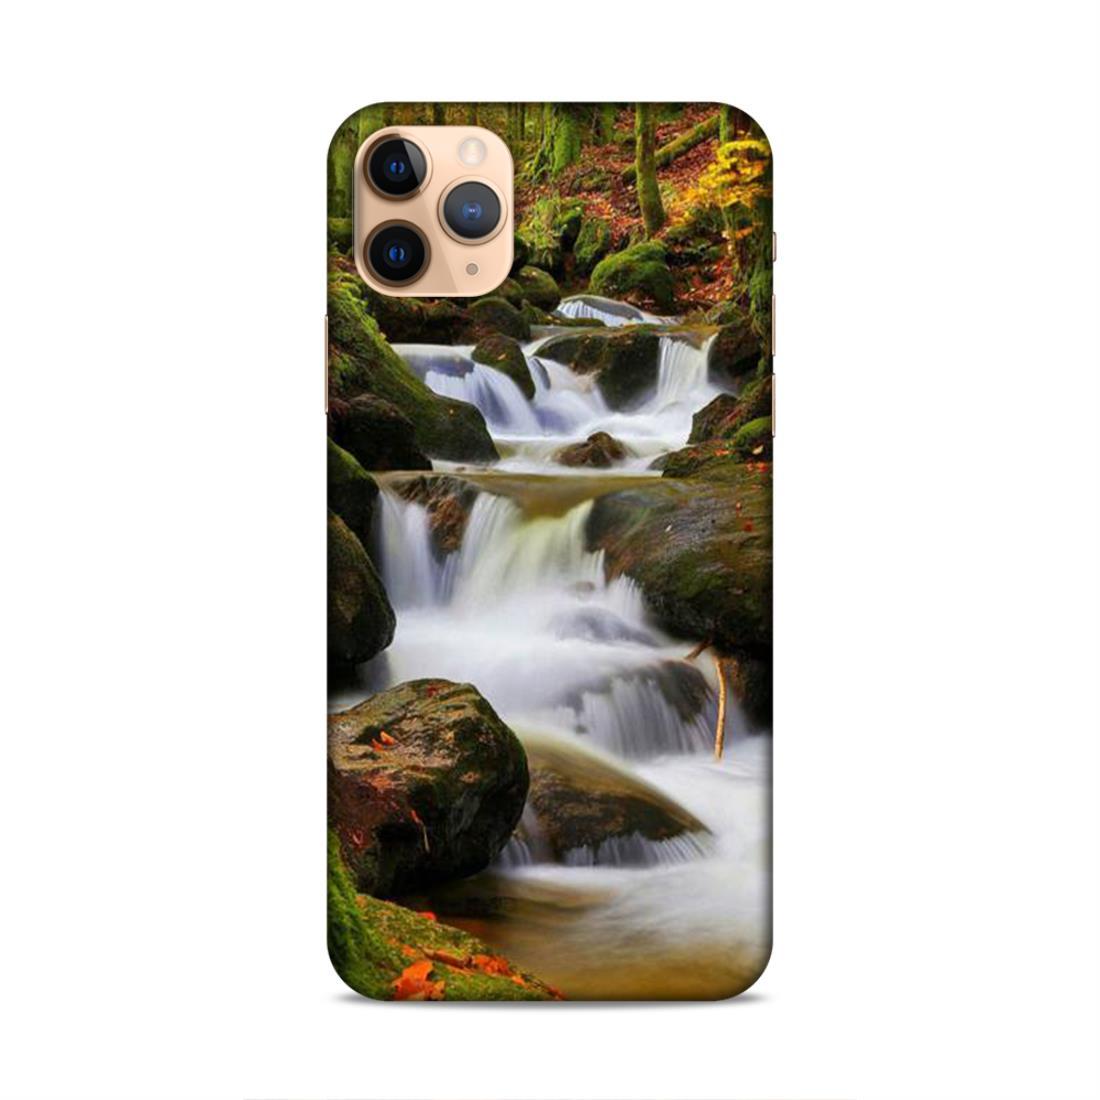 Natural Waterfall iPhone 11 Pro Phone Cover Case